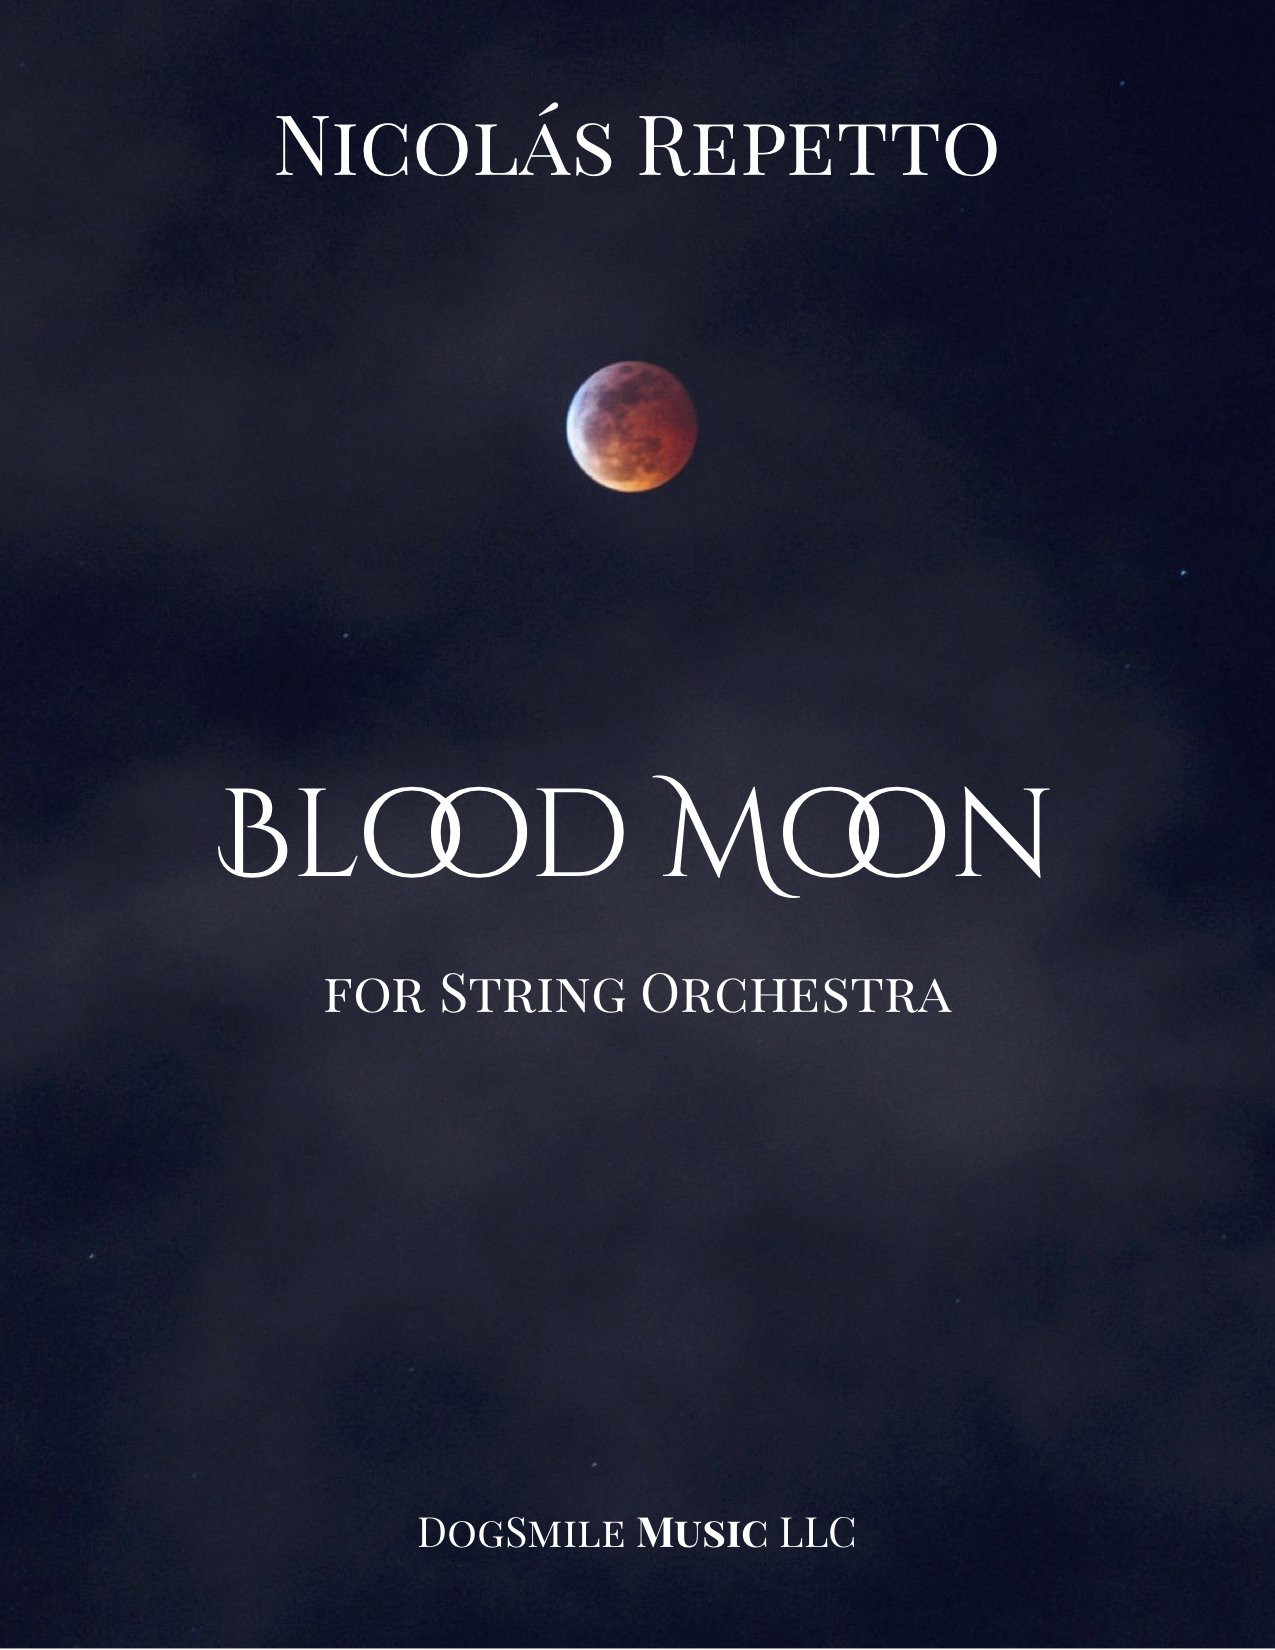 Blood Moon for String Orchestra - Cover Page and Full Score Only (for Preview Only p1).jpg